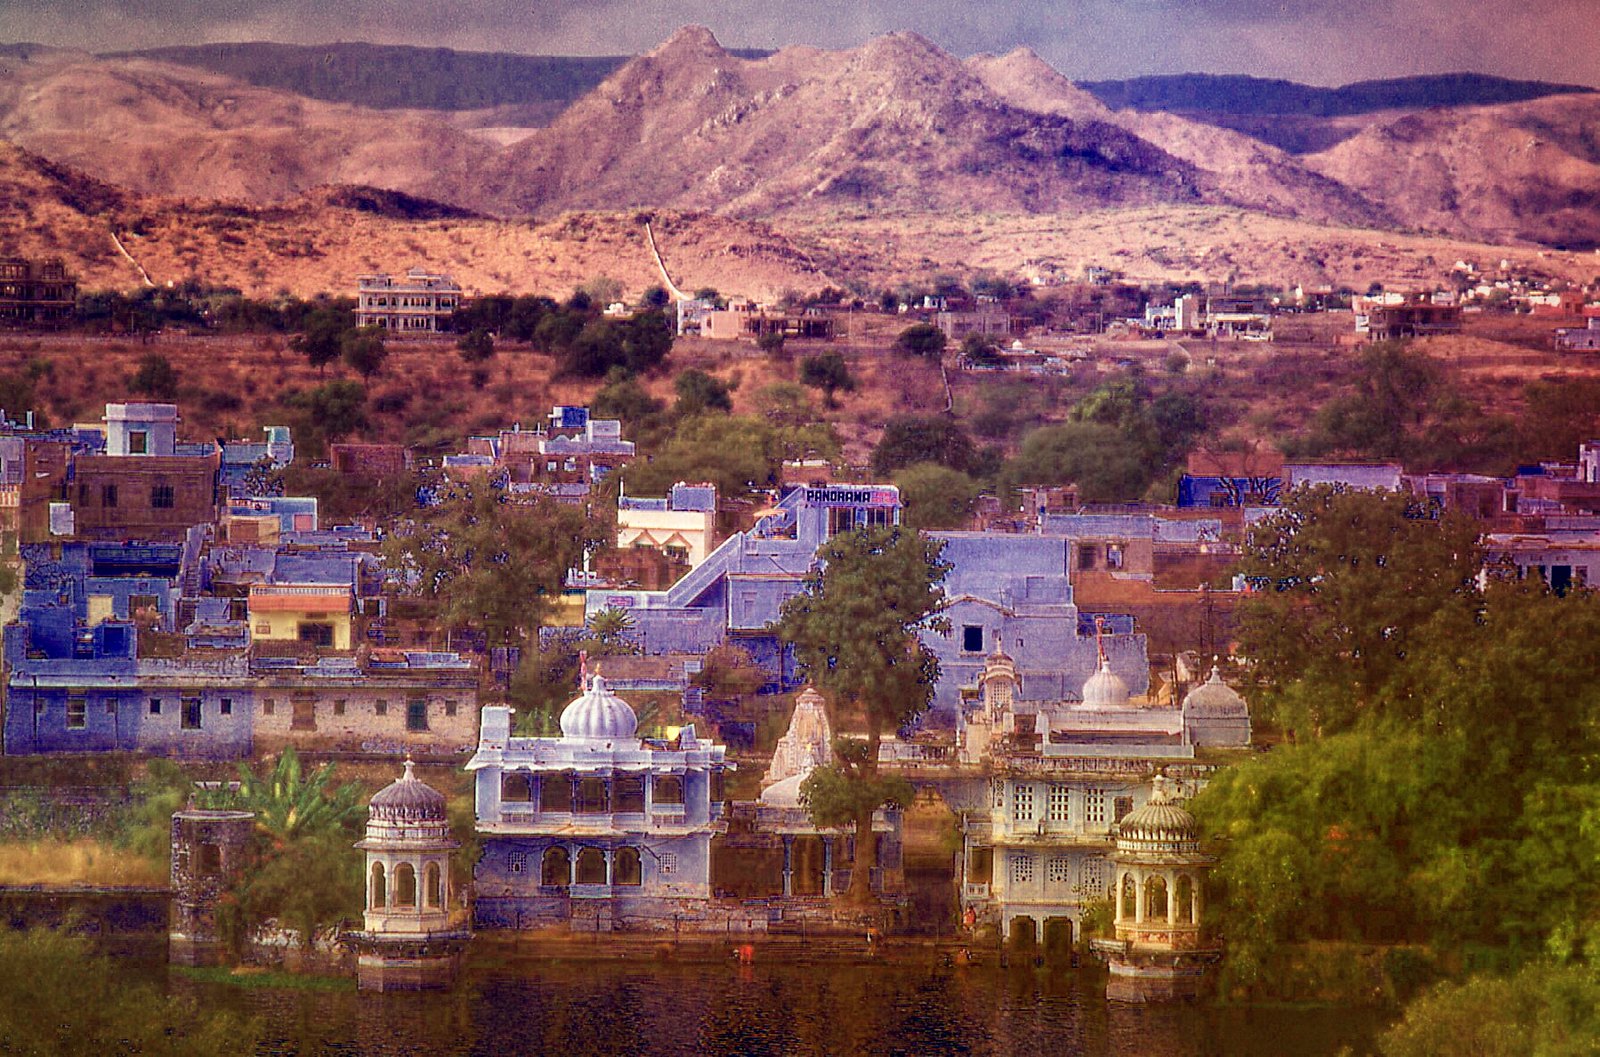 Rajasthan - The Land Of Kings